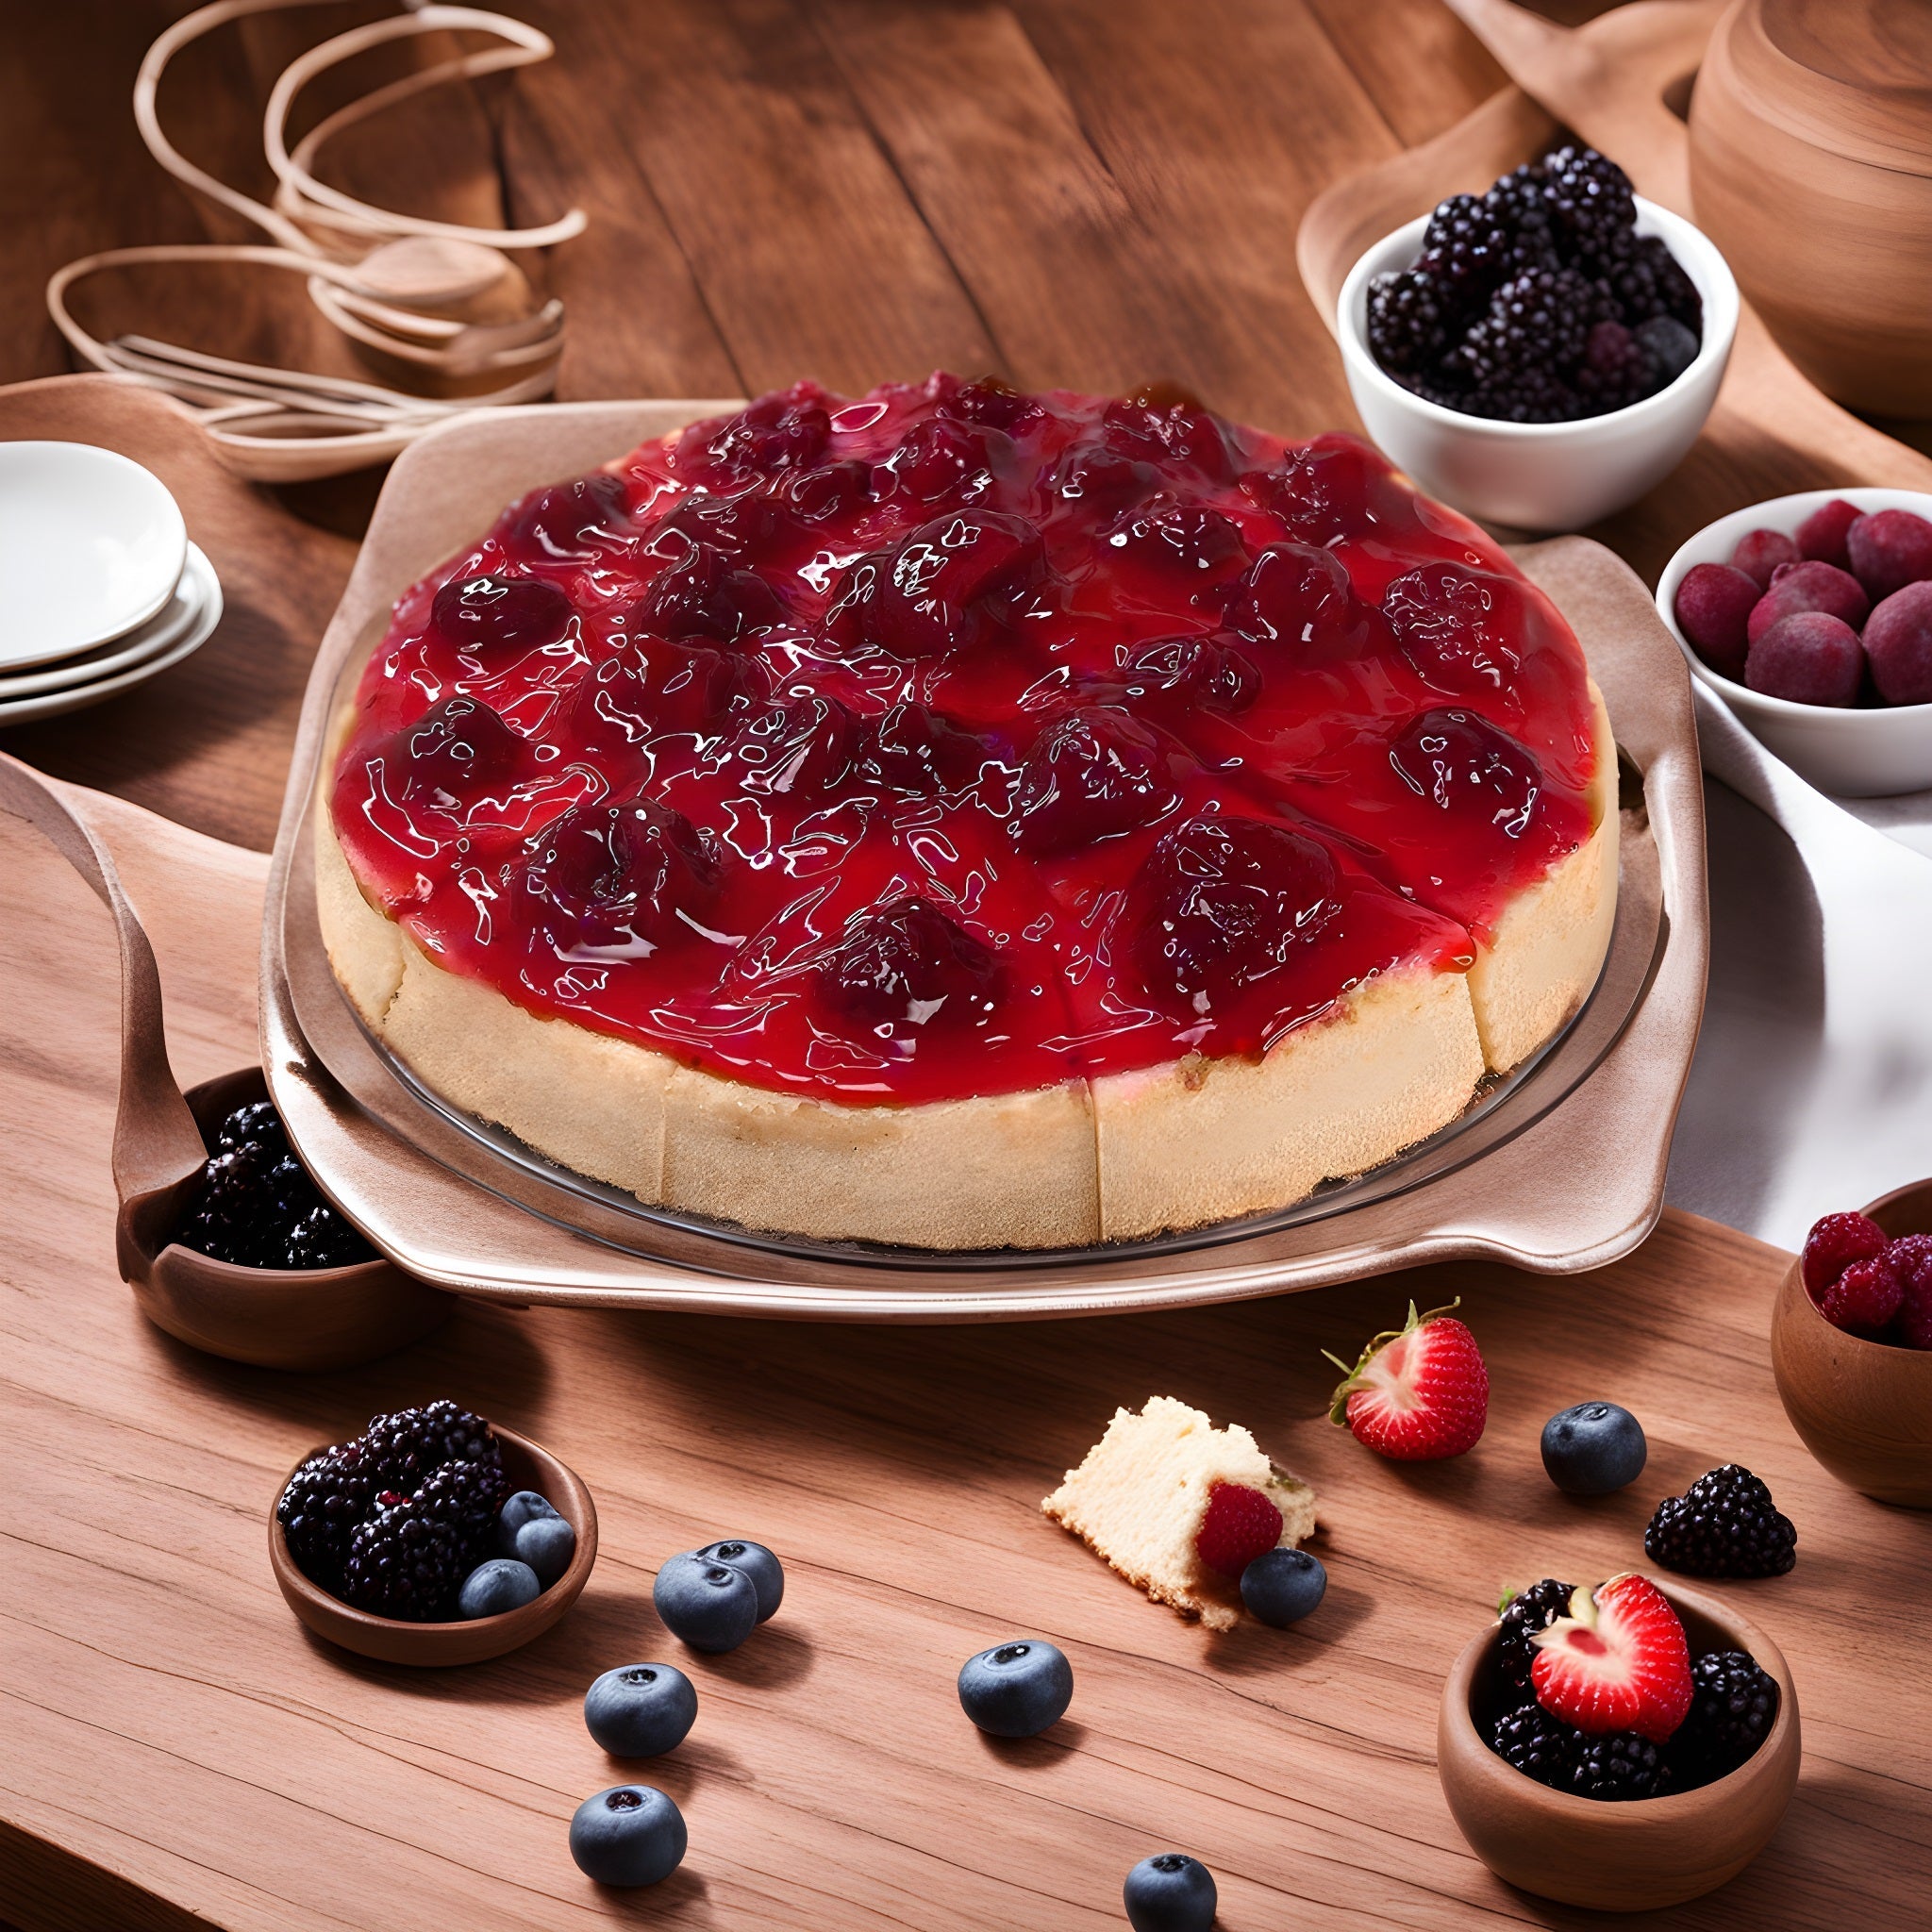 Andy Anand Deliciously Freshly Baked Sugar-Free Strawberry Cheesecake - The Best Classic Taste